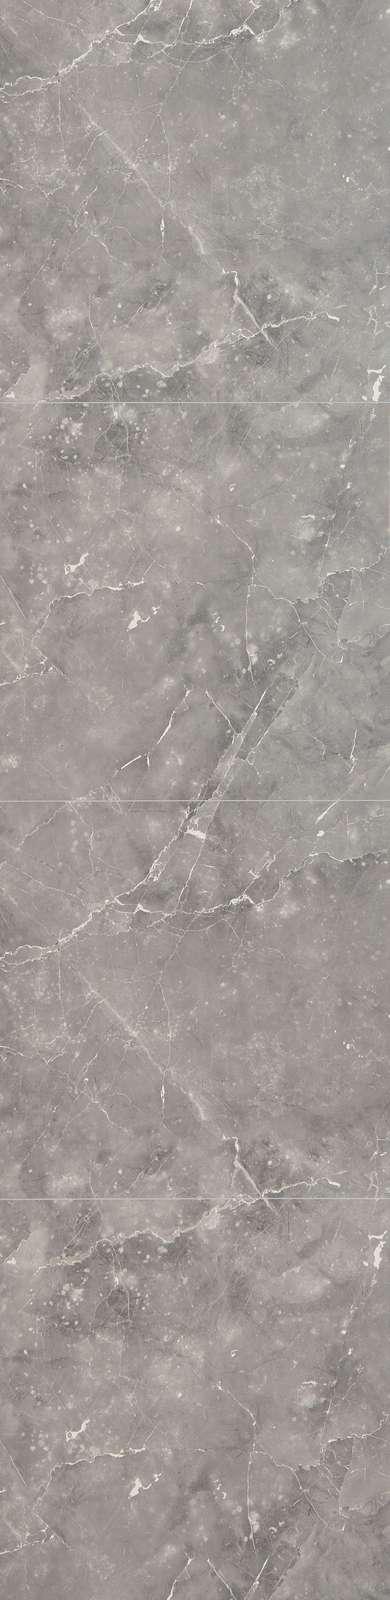 Silver gray marble 24 x 24 laminate shower and tub wall panels - Innovate Building Solutions 